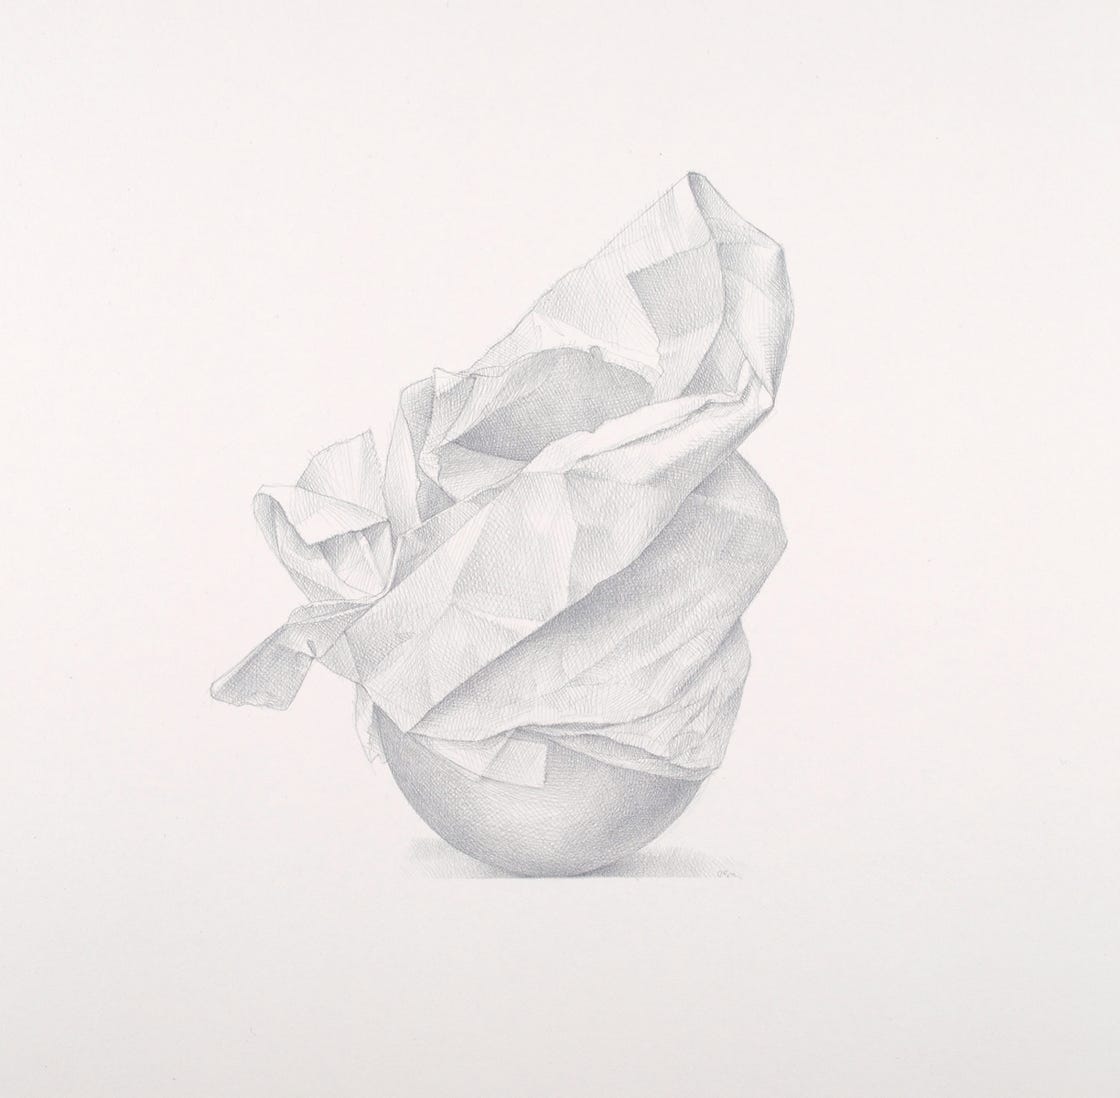 Turban, 2013, silverpoint on prepared paper, 11 x 11 inches